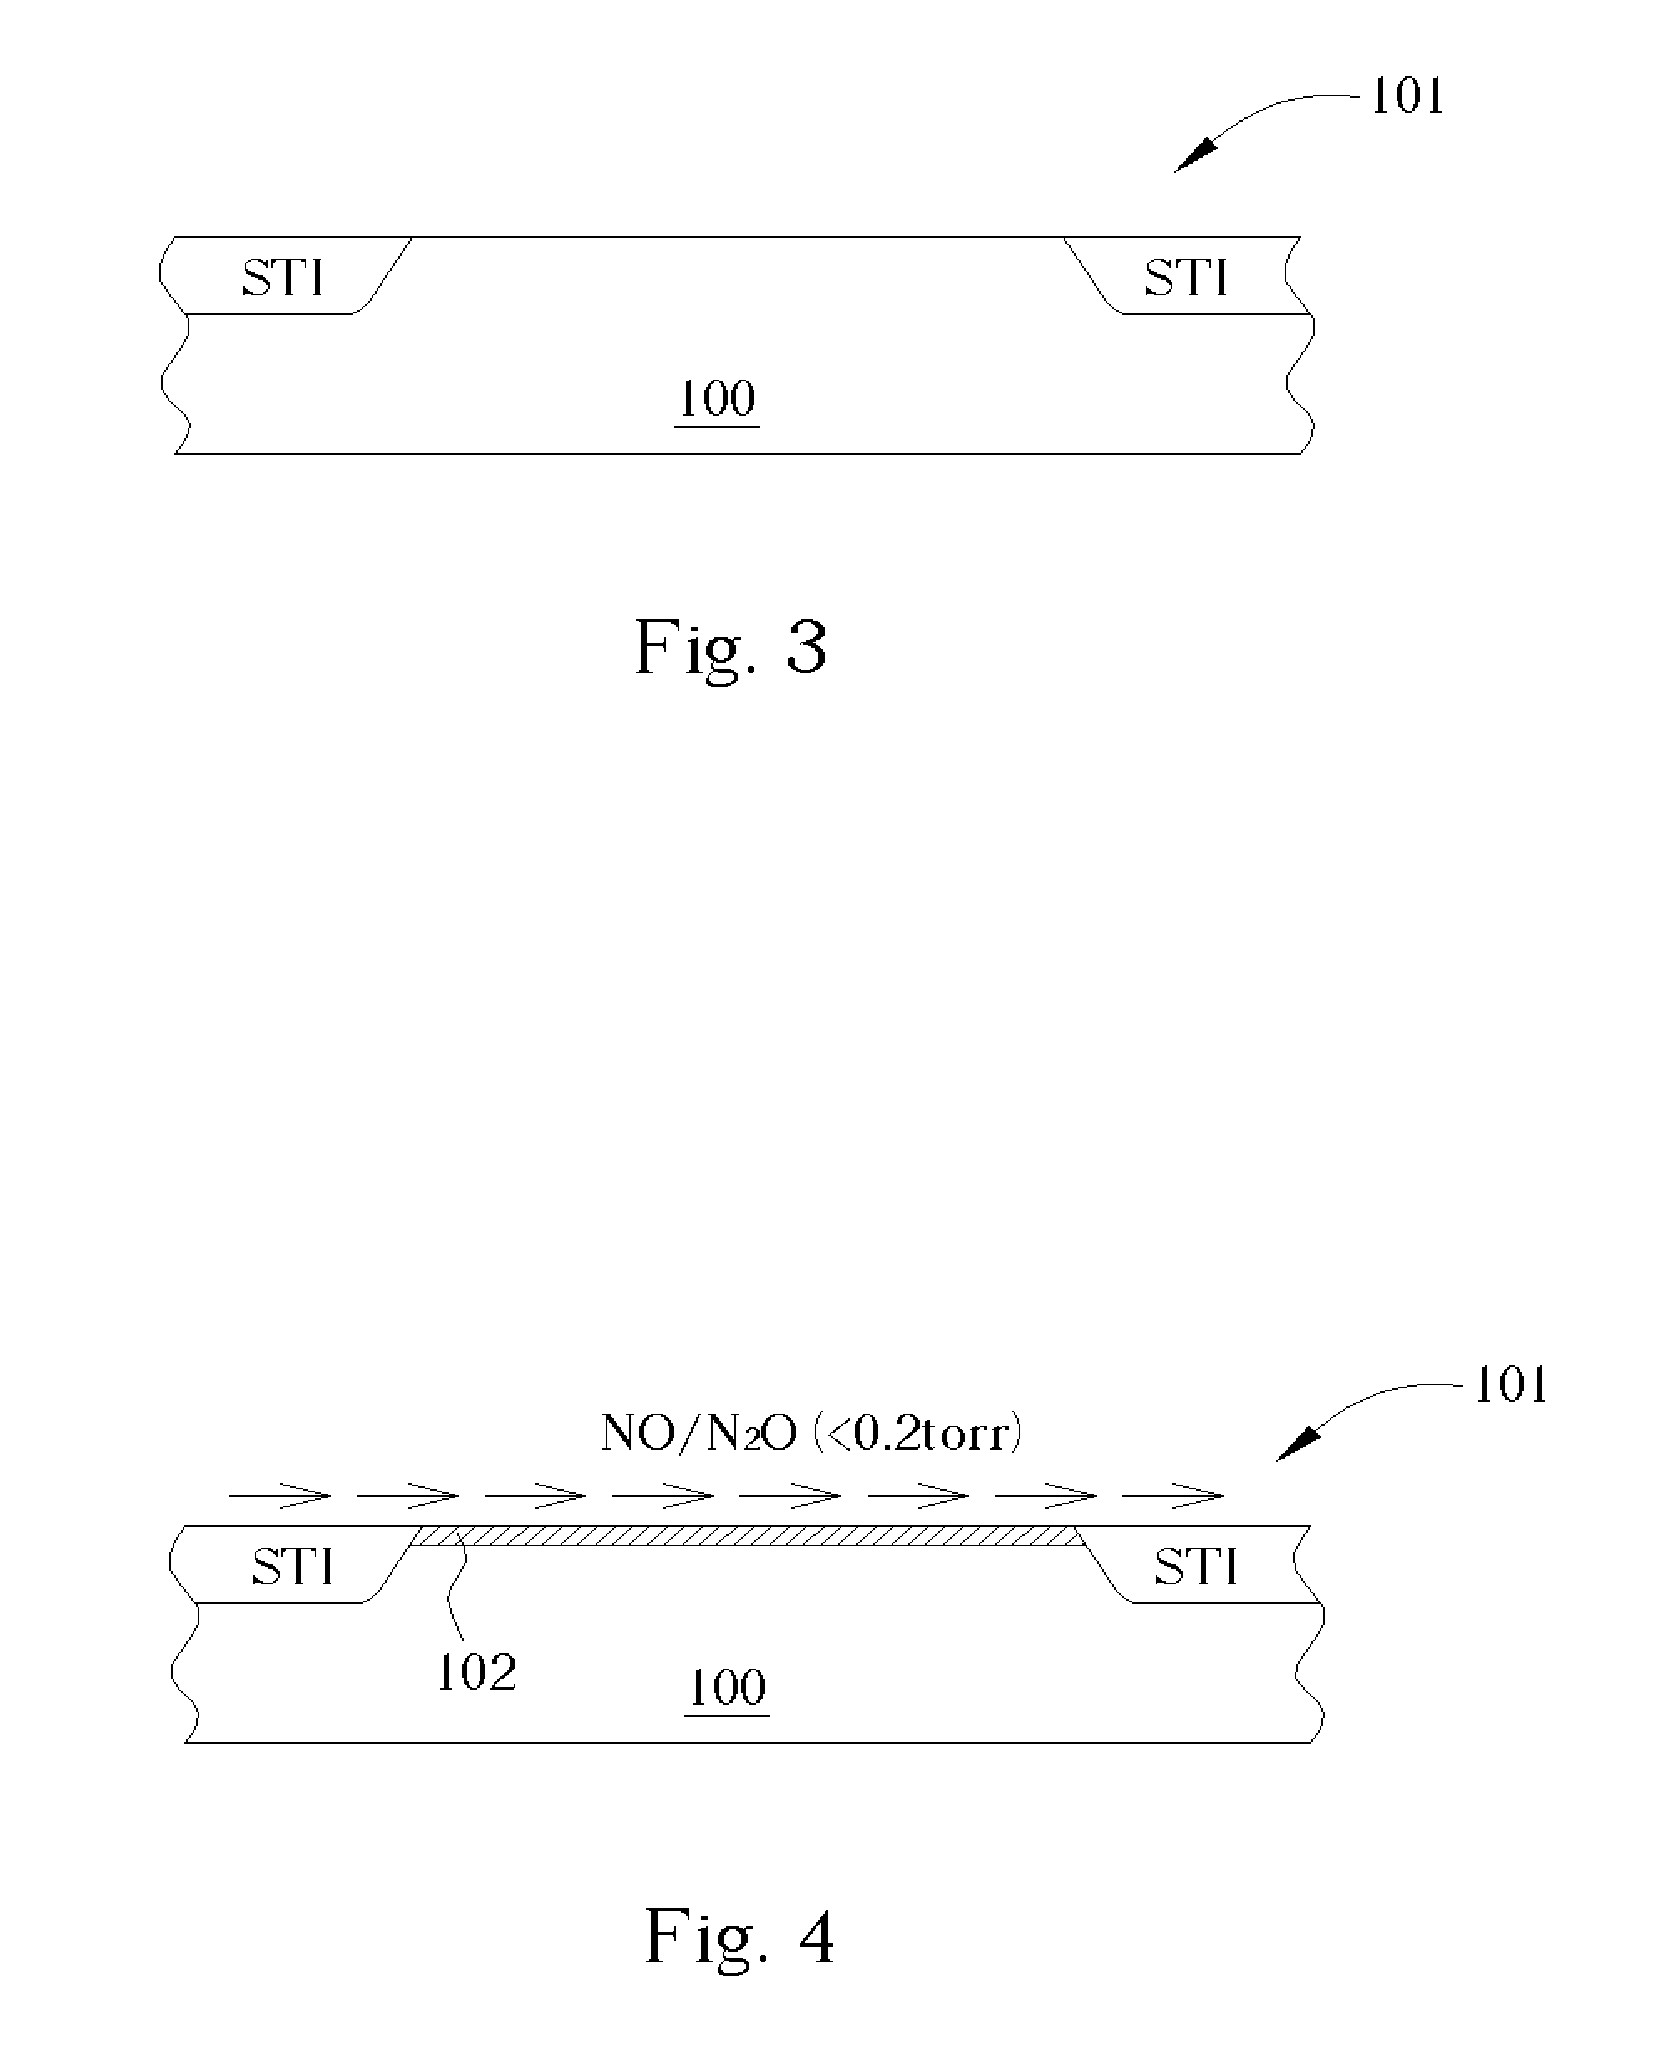 Method for growing a gate oxide layer on a silicon surface with preliminary n2o anneal